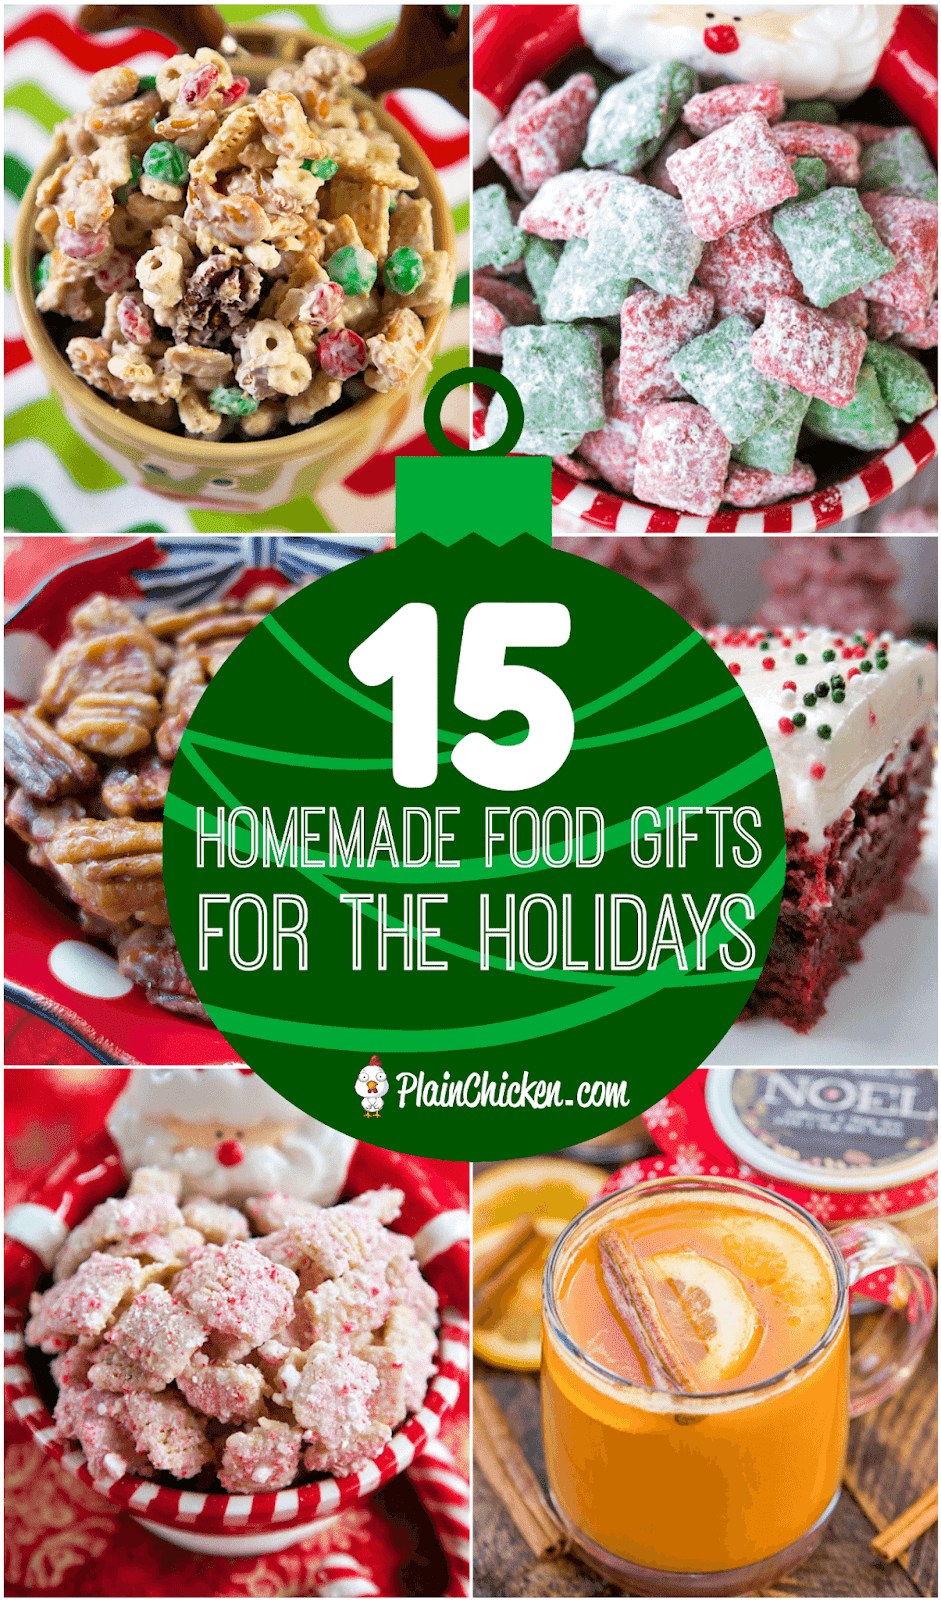 15 Homemade Food Gifts for the Holidays -homemade gifts are the BEST gifts! Here are 15 ideas for easy homemade holiday gifts - perfect for teachers, co-workers and friends!! Something for everyone! #homemade #handmadechristmas #christmas